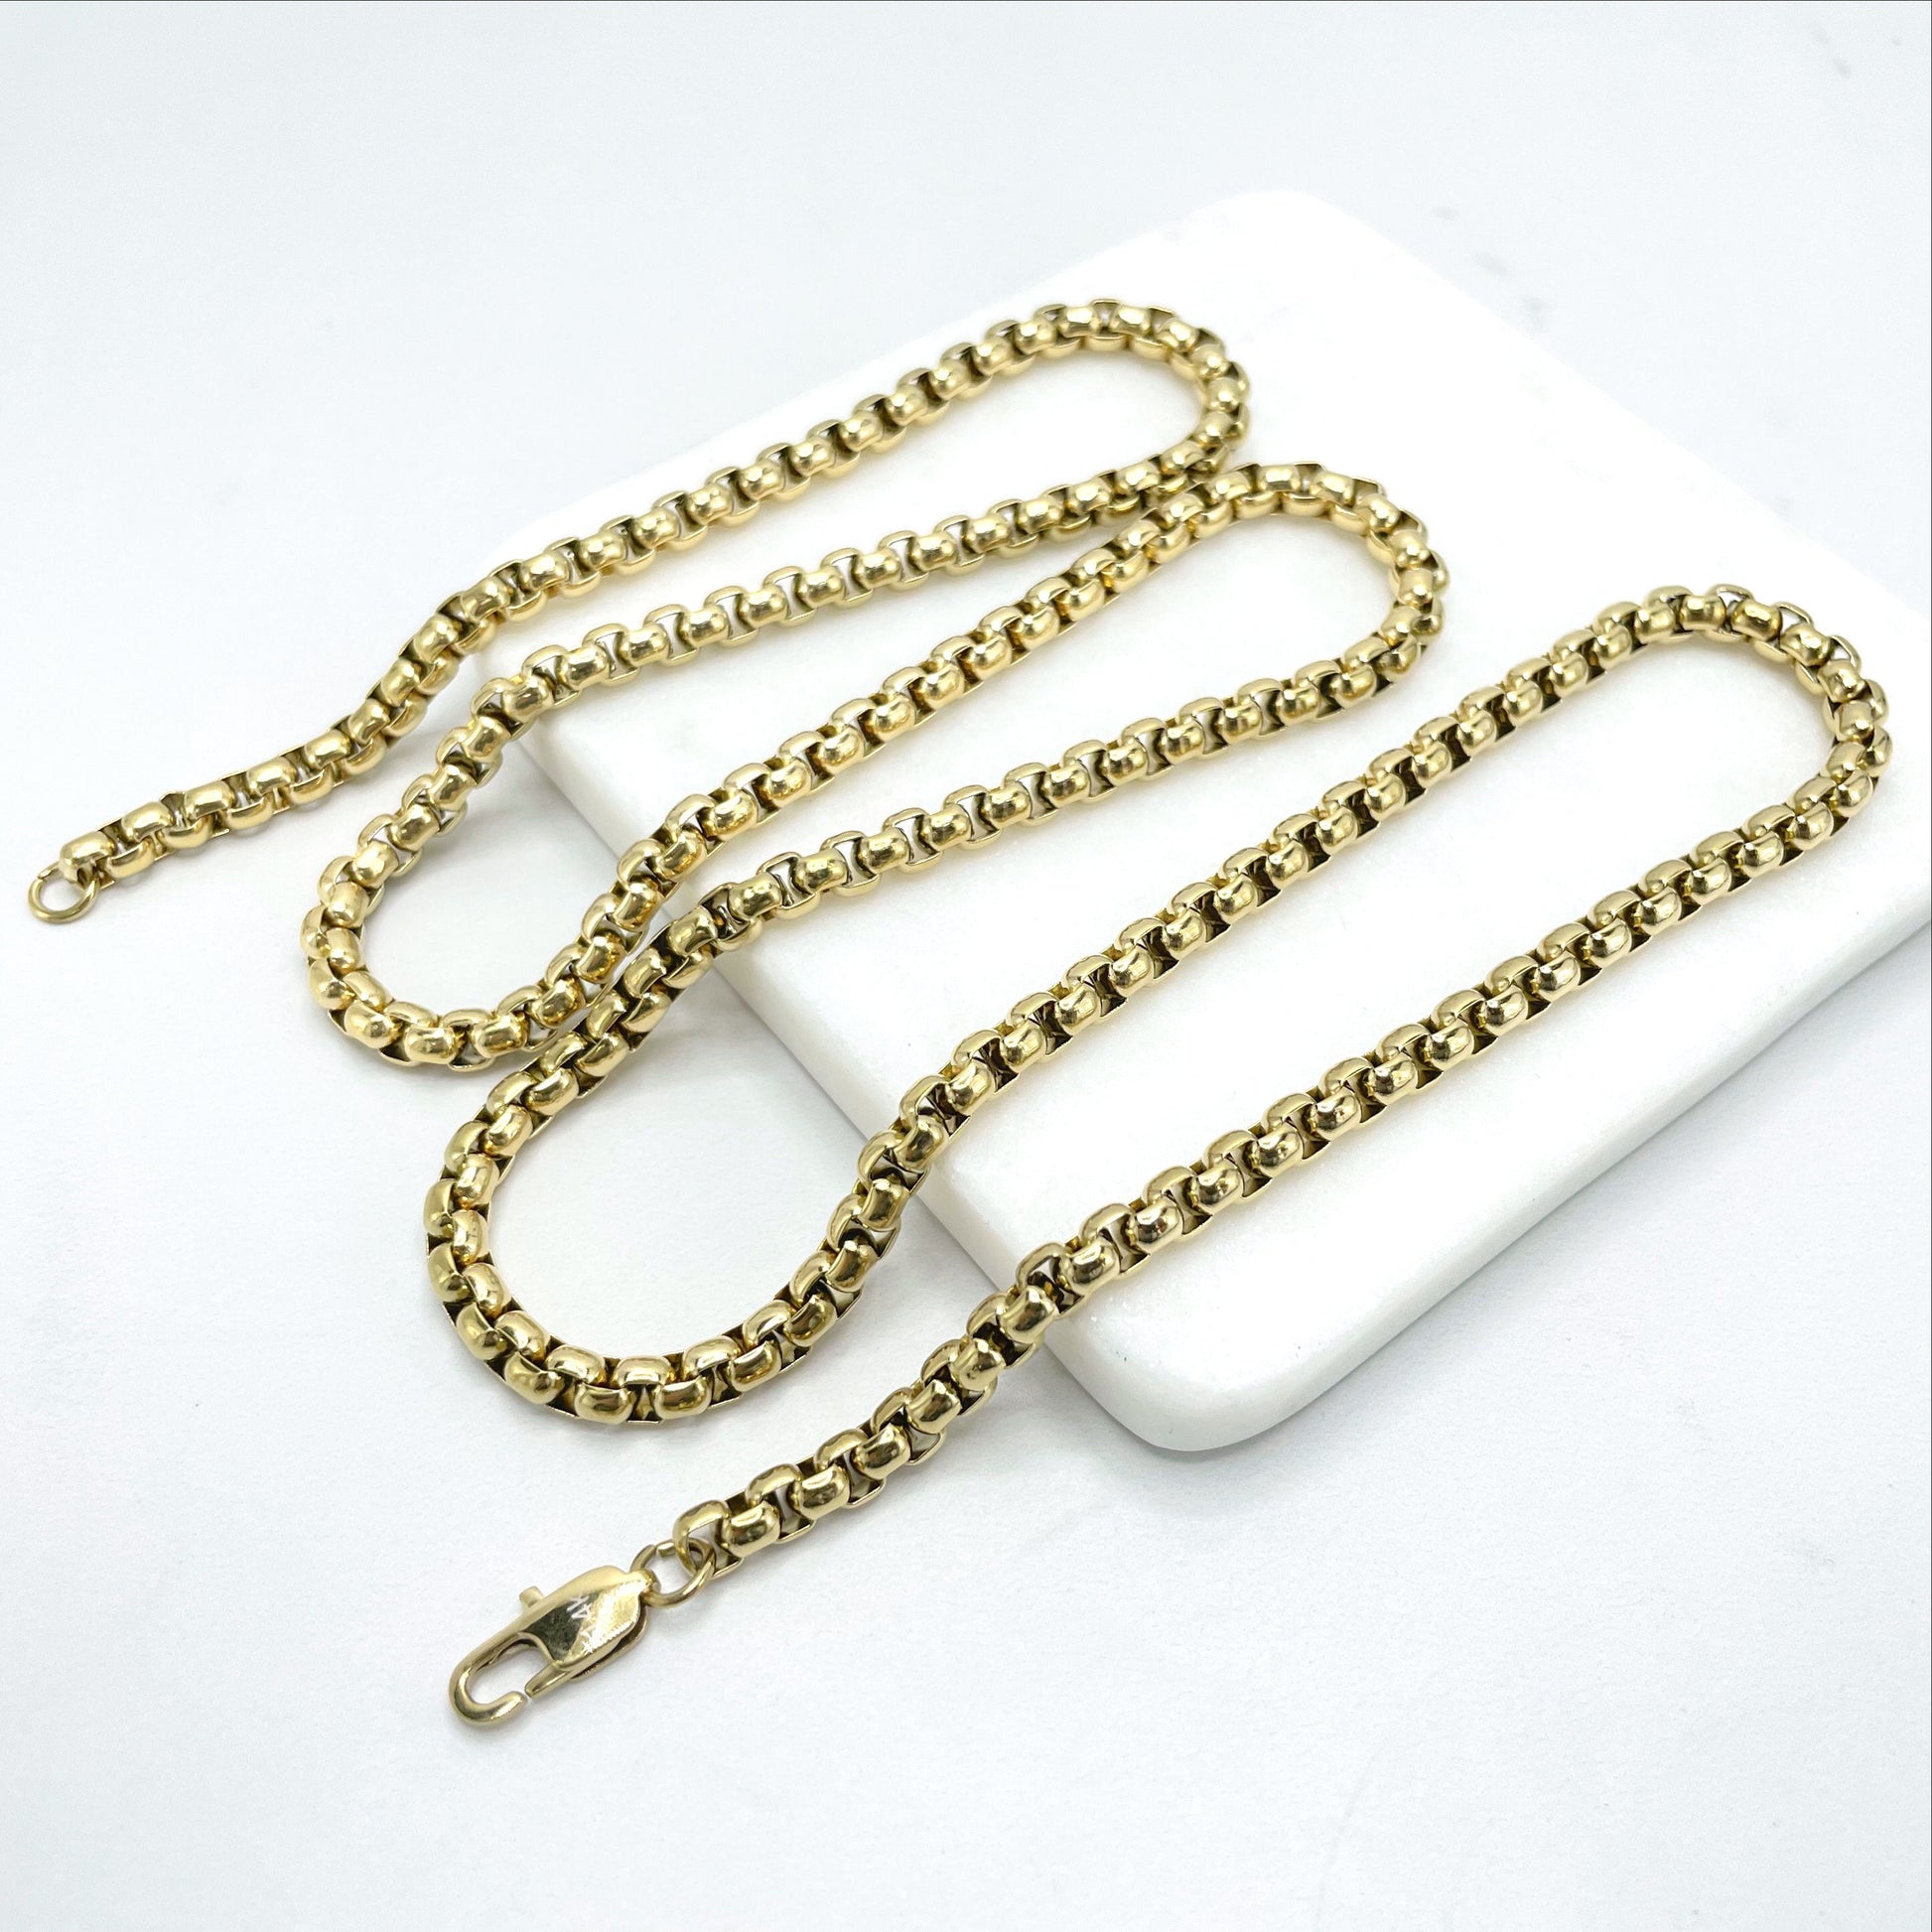 14k Gold Plated On Stainless Steel 5mm Box Chain Link Necklace 30" Long, Unisex Chain, Wholesale Jewelry Making Supplies